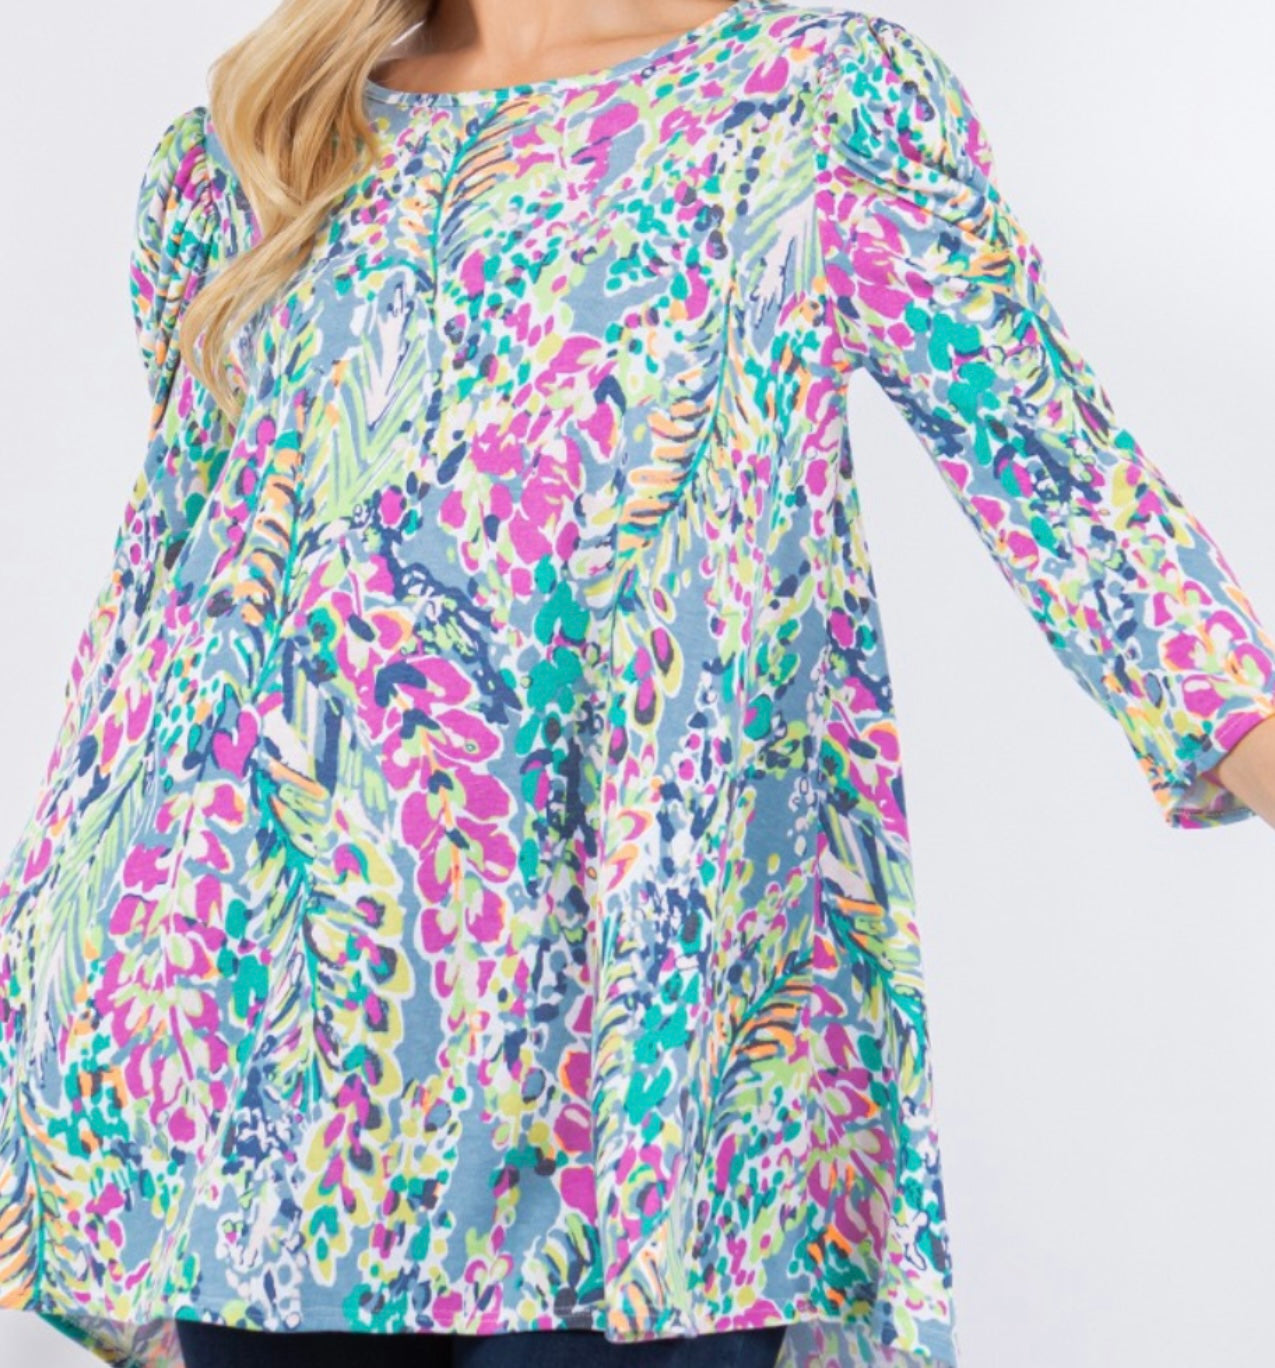 “A Day at the Beach” Tunic Top in Plus